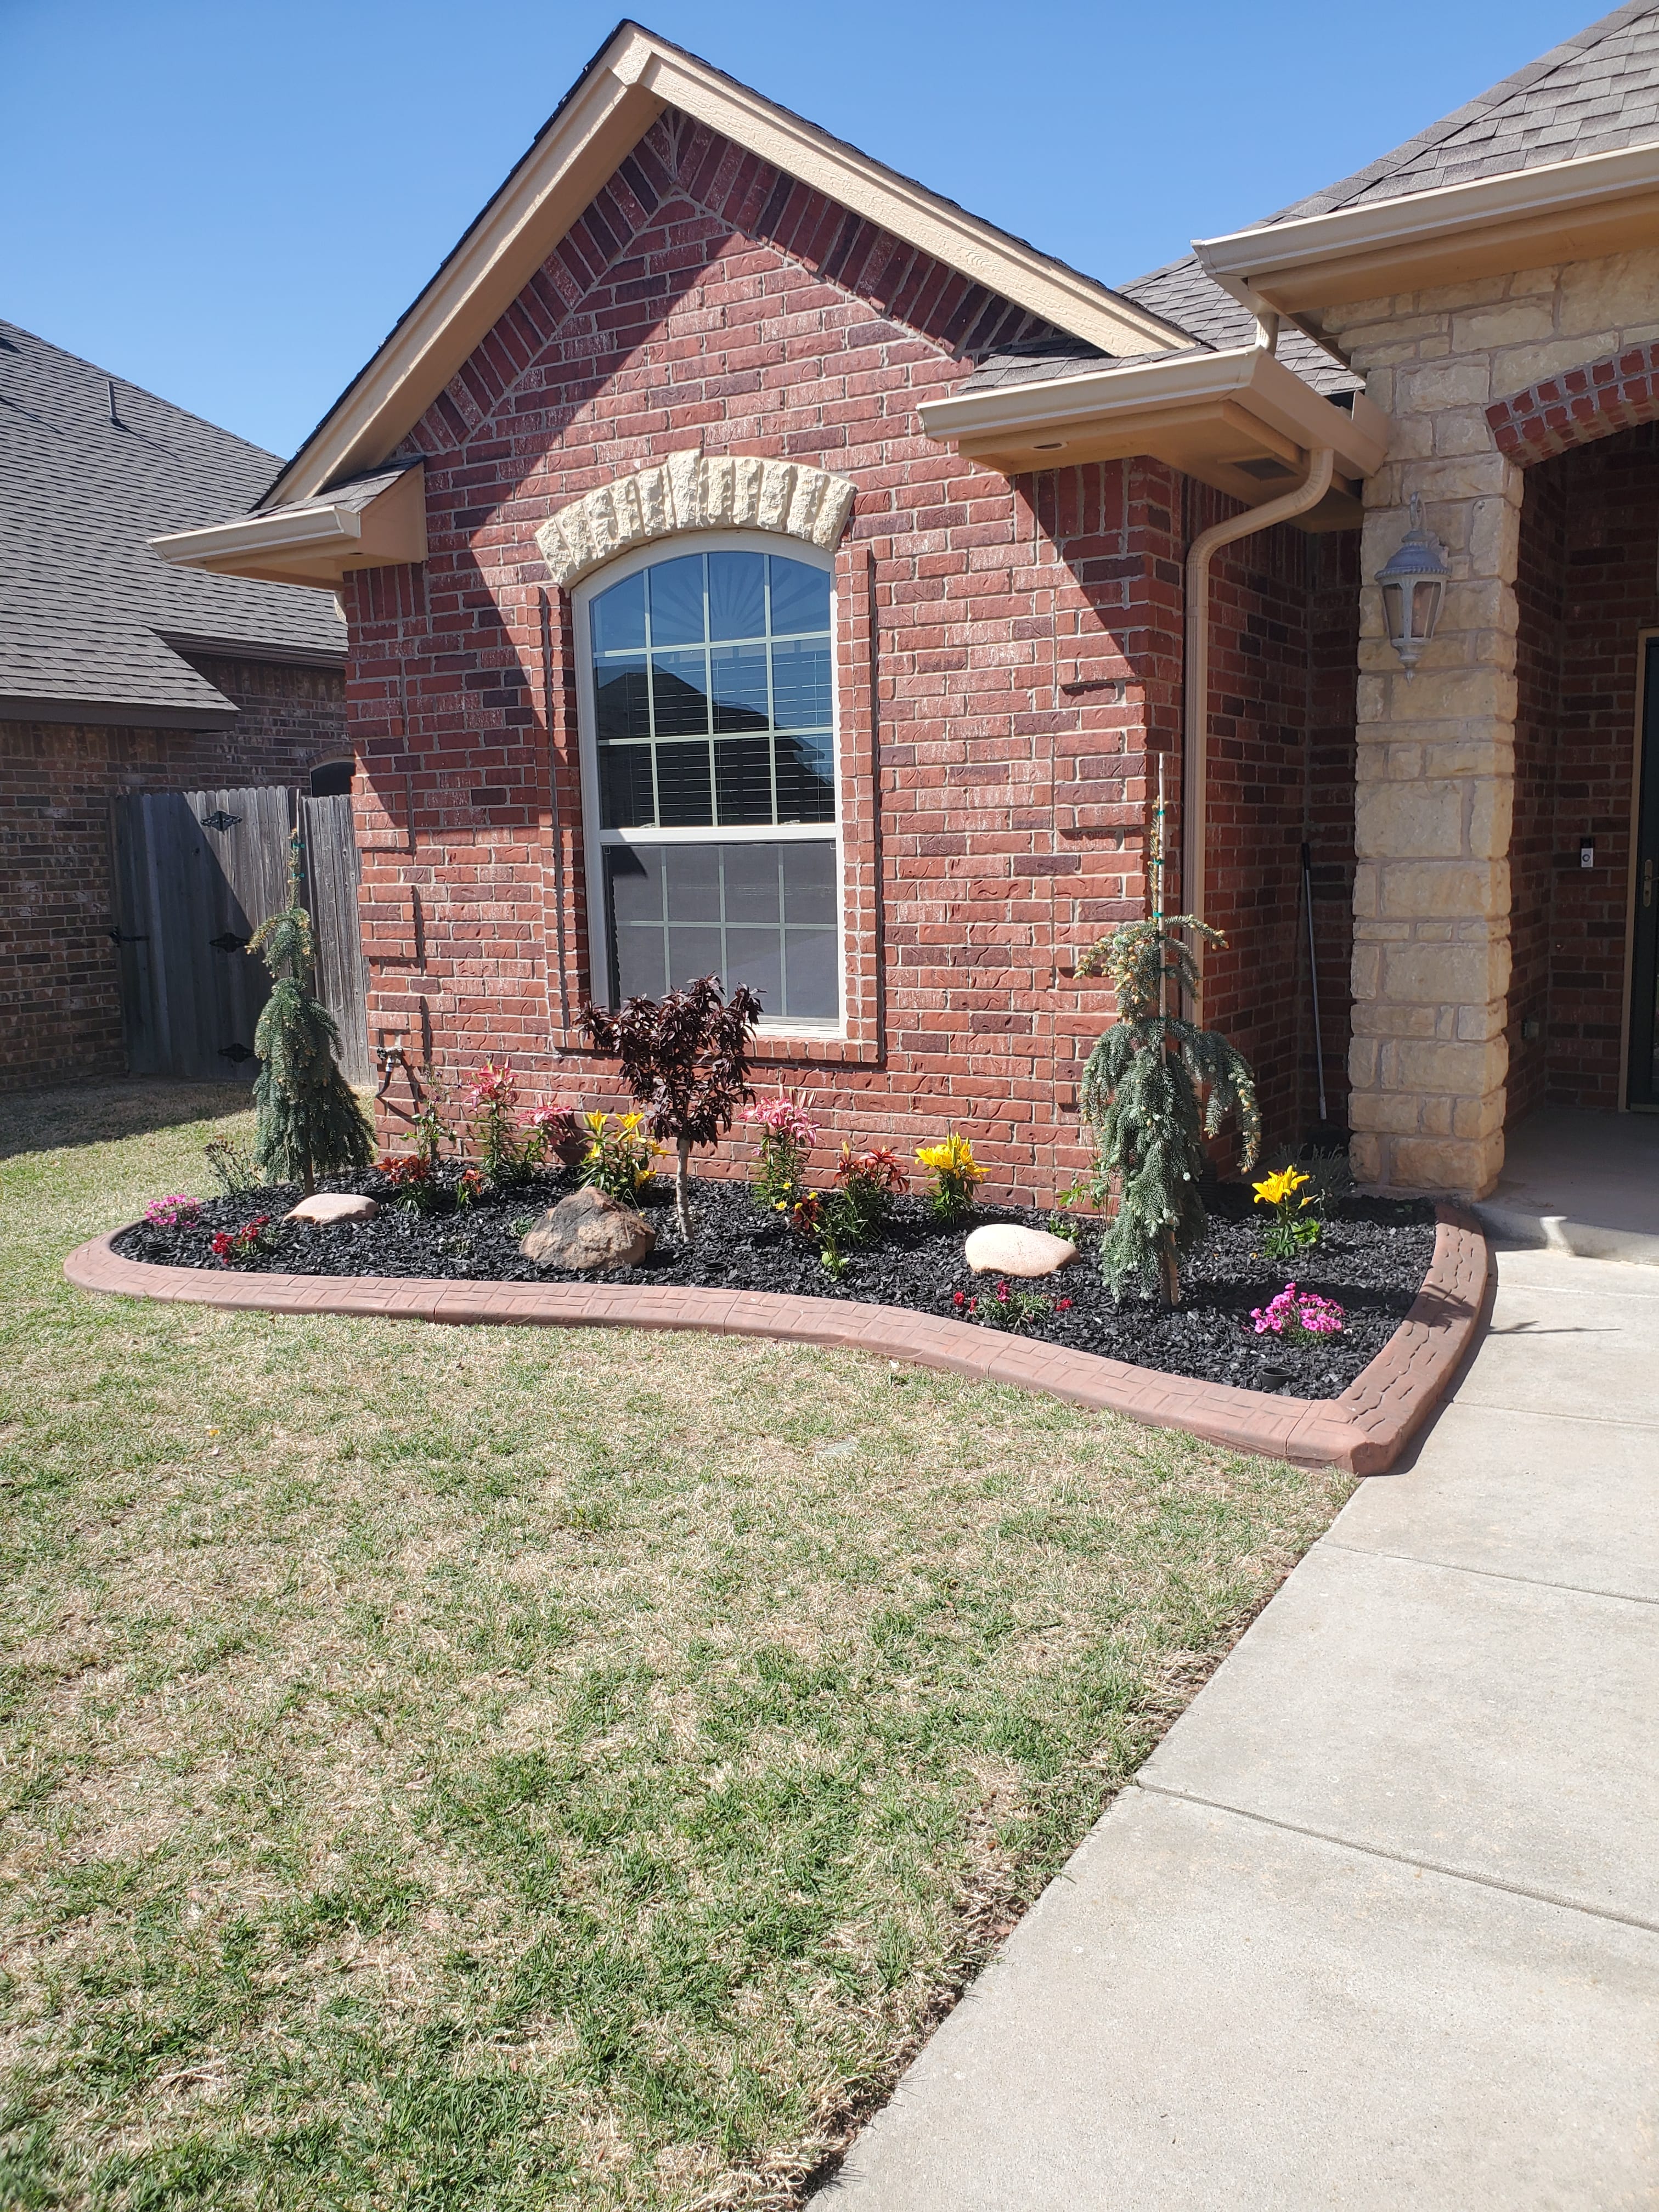 Grass & Trees, LLC Fully Insured Lawn Care Service in Moore, Norman & South OKC